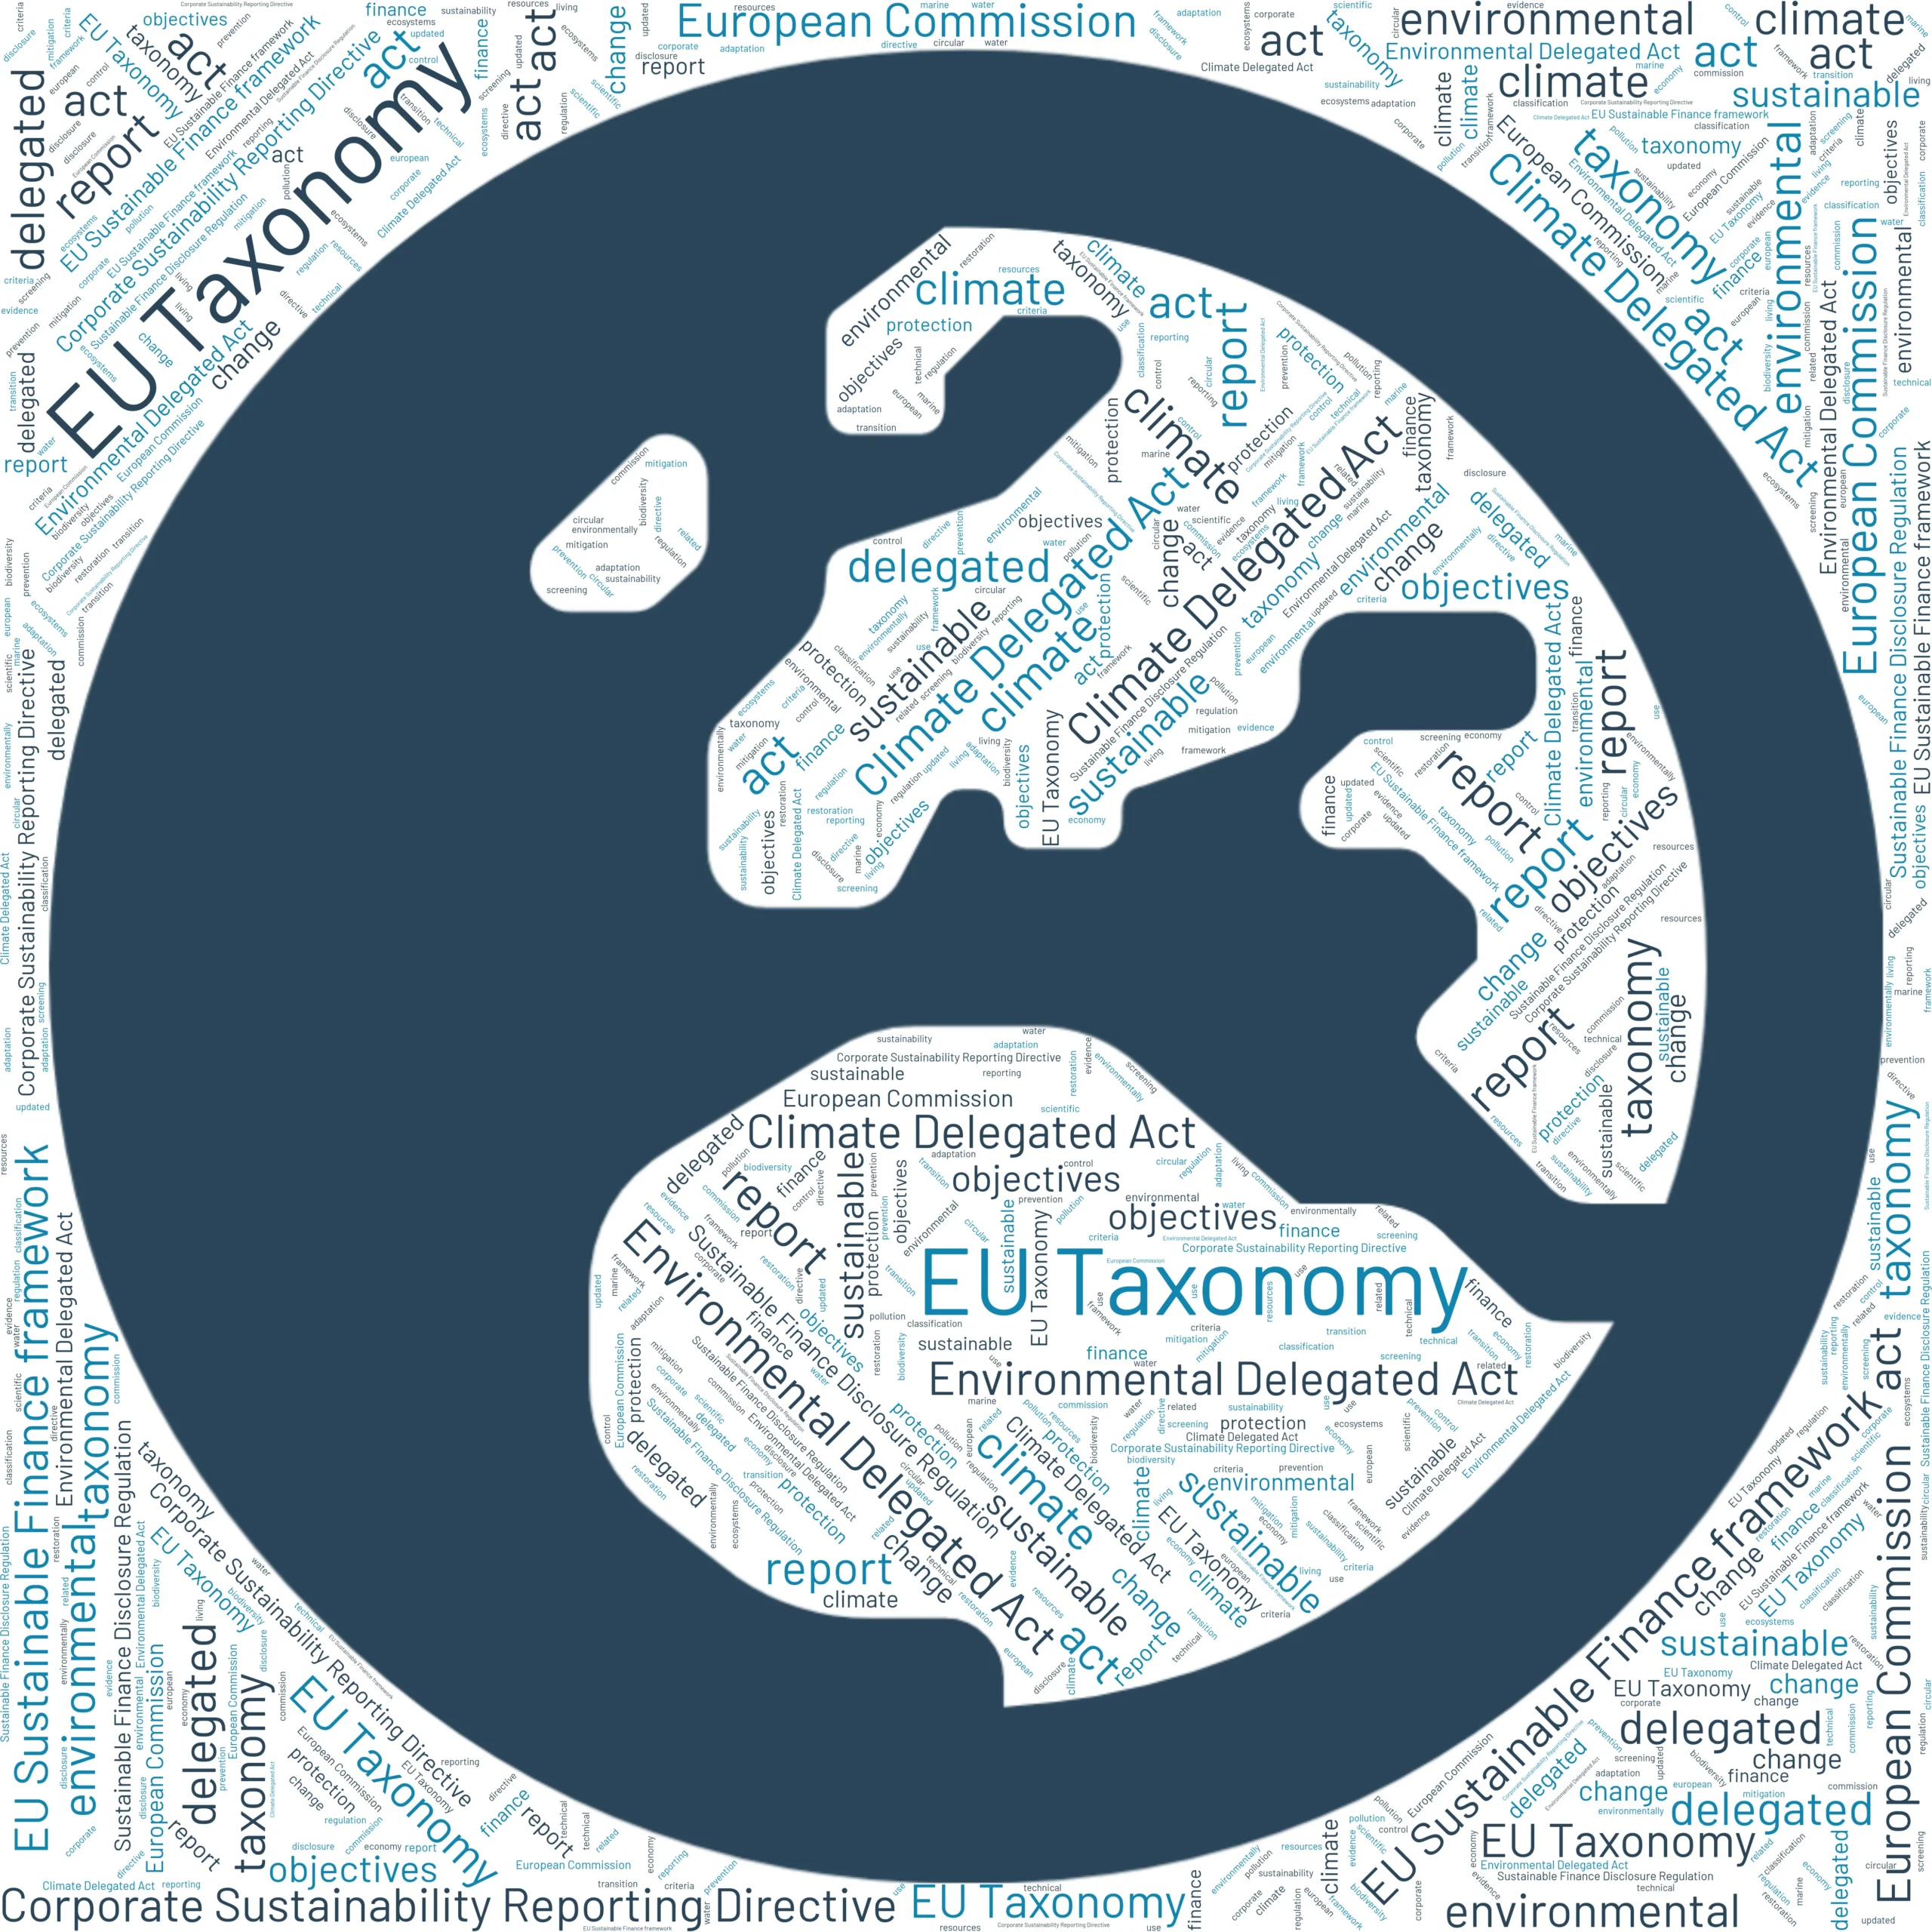 EU releases Environmental Delegated Act and amendments to Climate Delegated Act